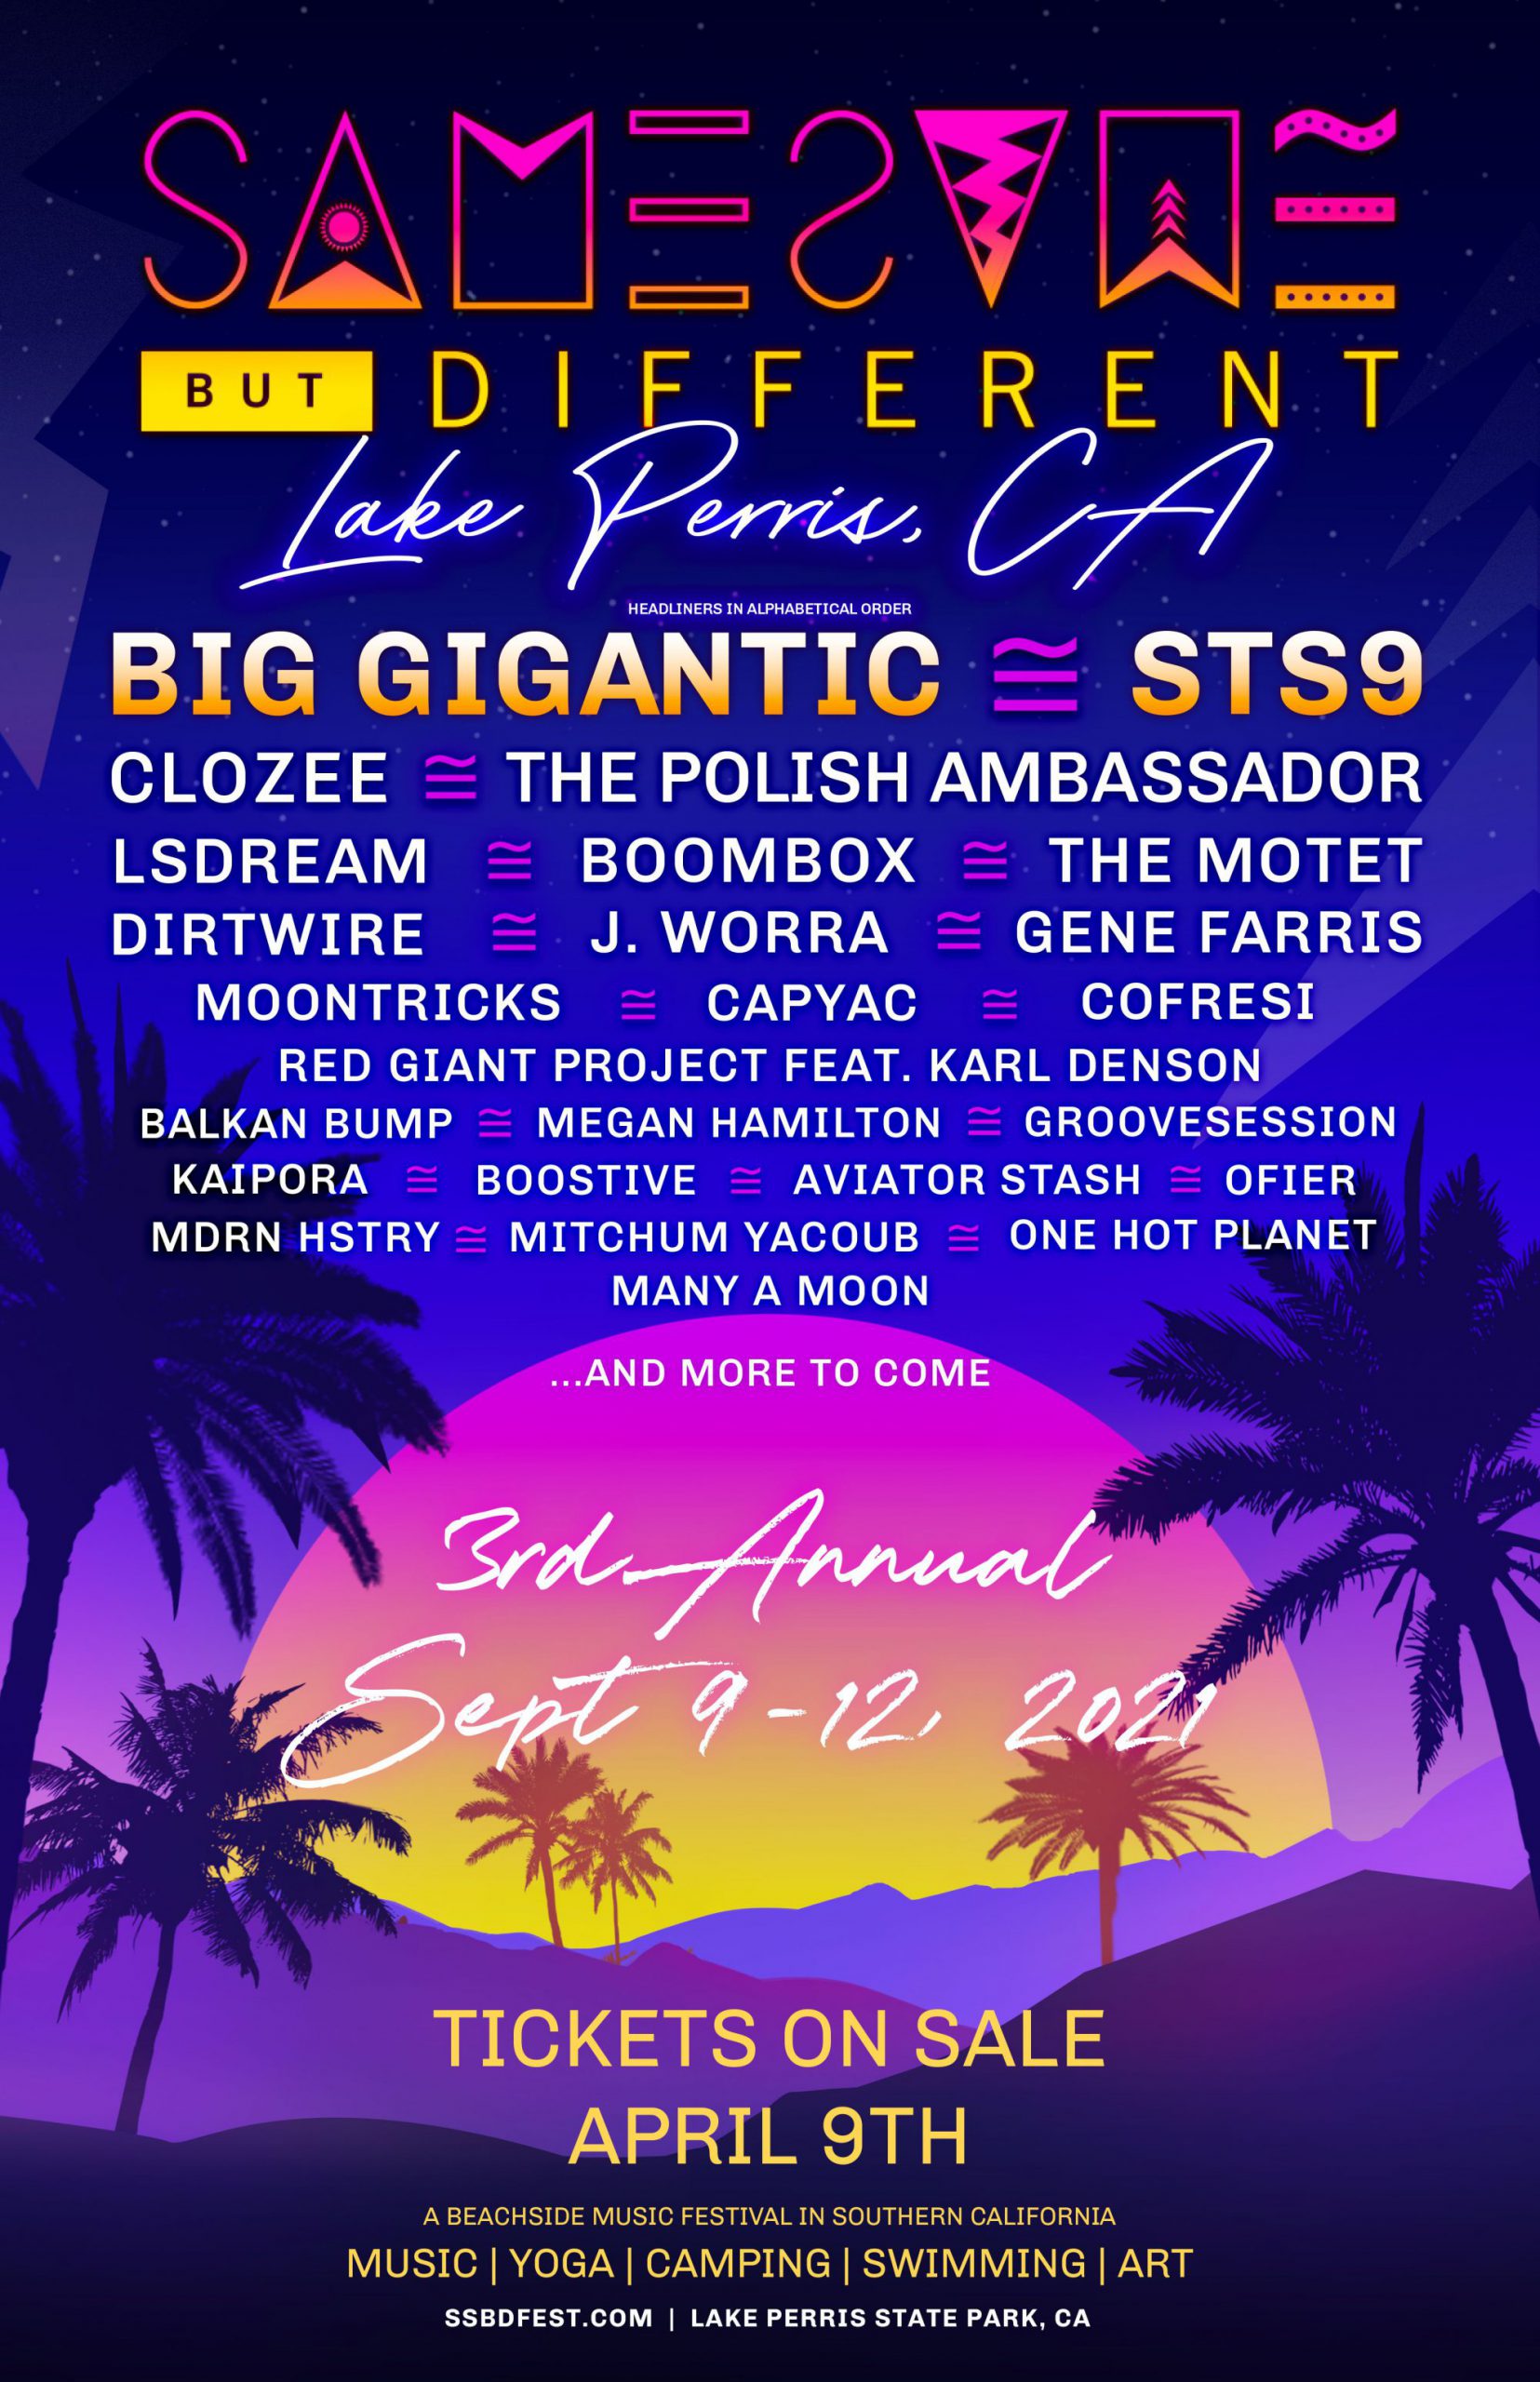 Same Same But Different 2021 Phase 1 Lineup